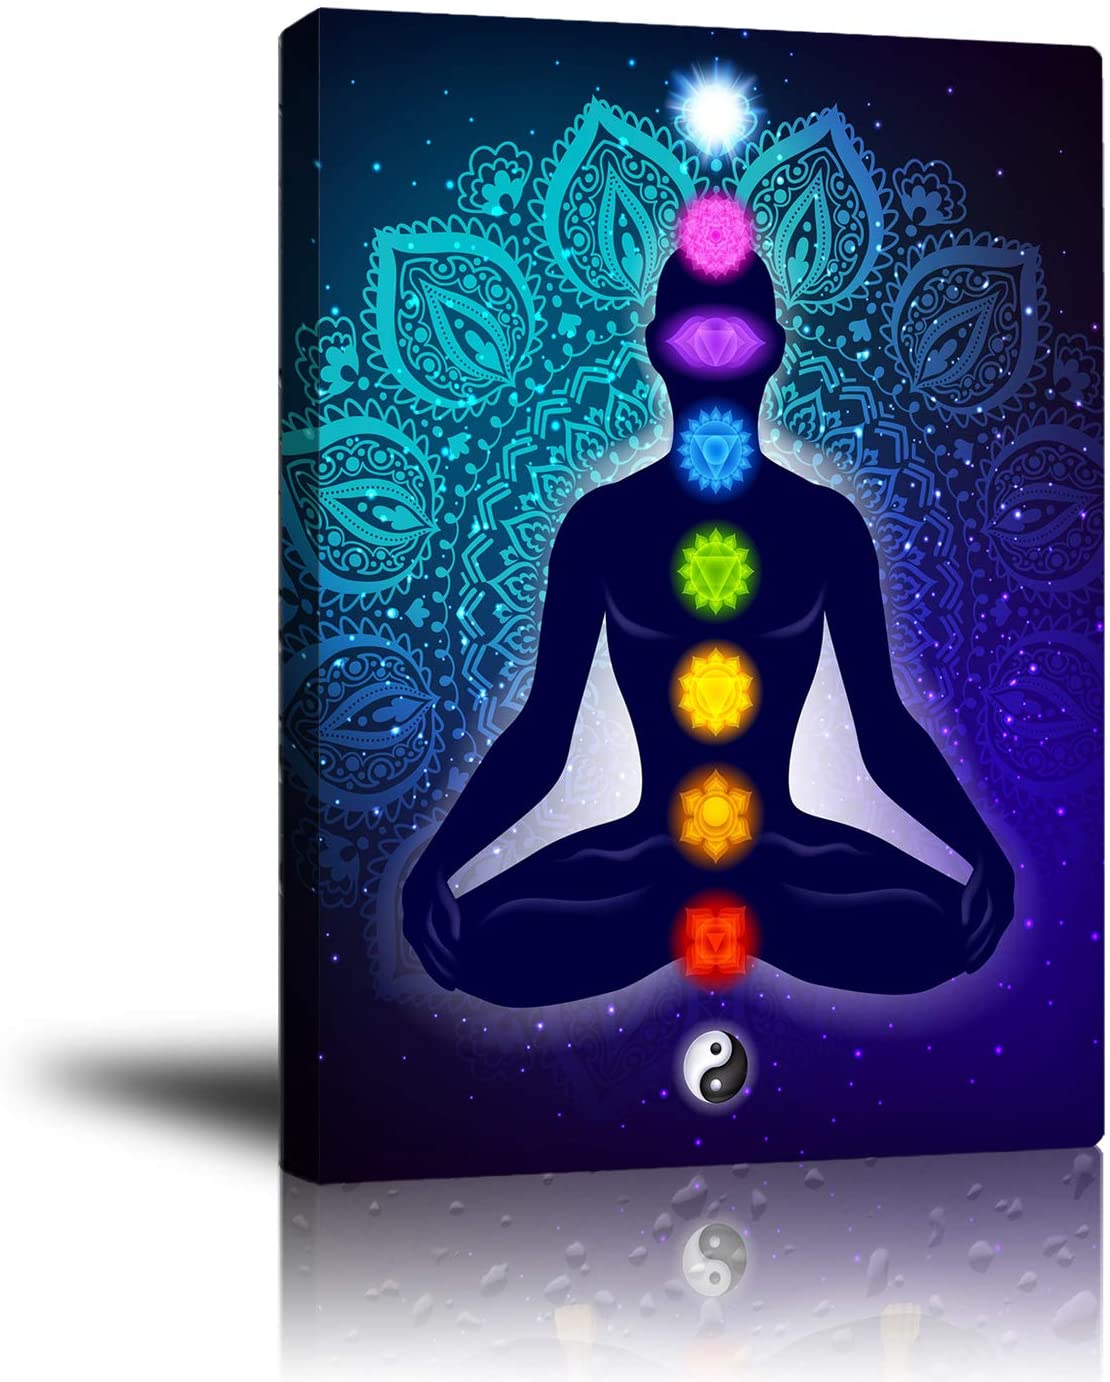 What are Chakras? And how chakra system is connected with your body energy